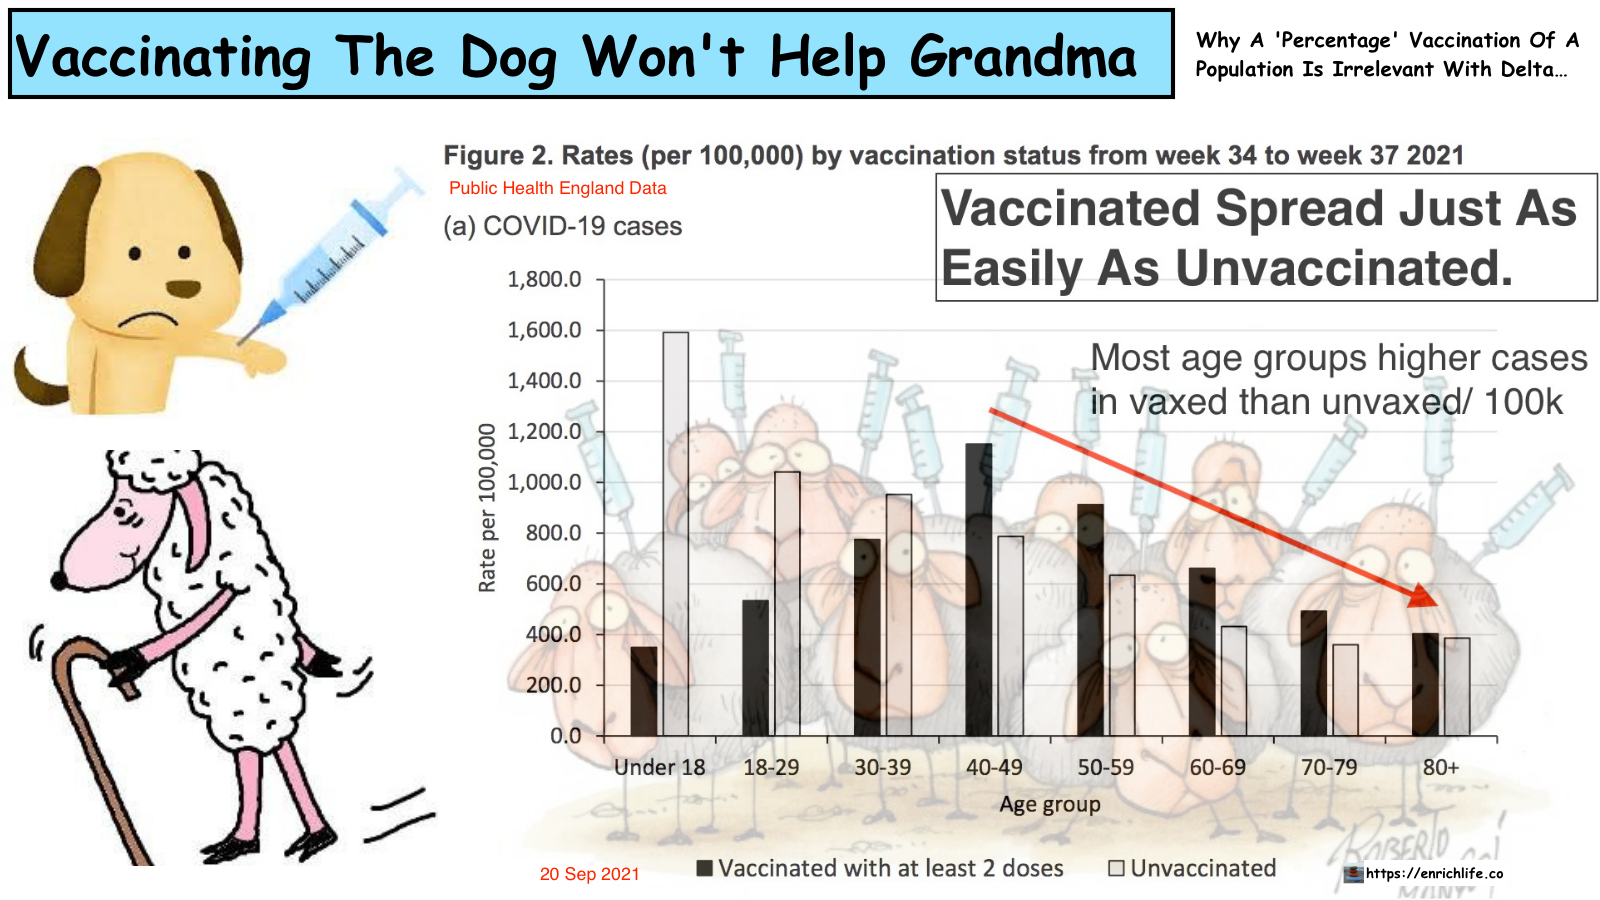 Vaccinating The Dog Won’t Help Grandma – Why A ‘Percentage’ Vaccination Of A Population Is Irrelevant With Delta: